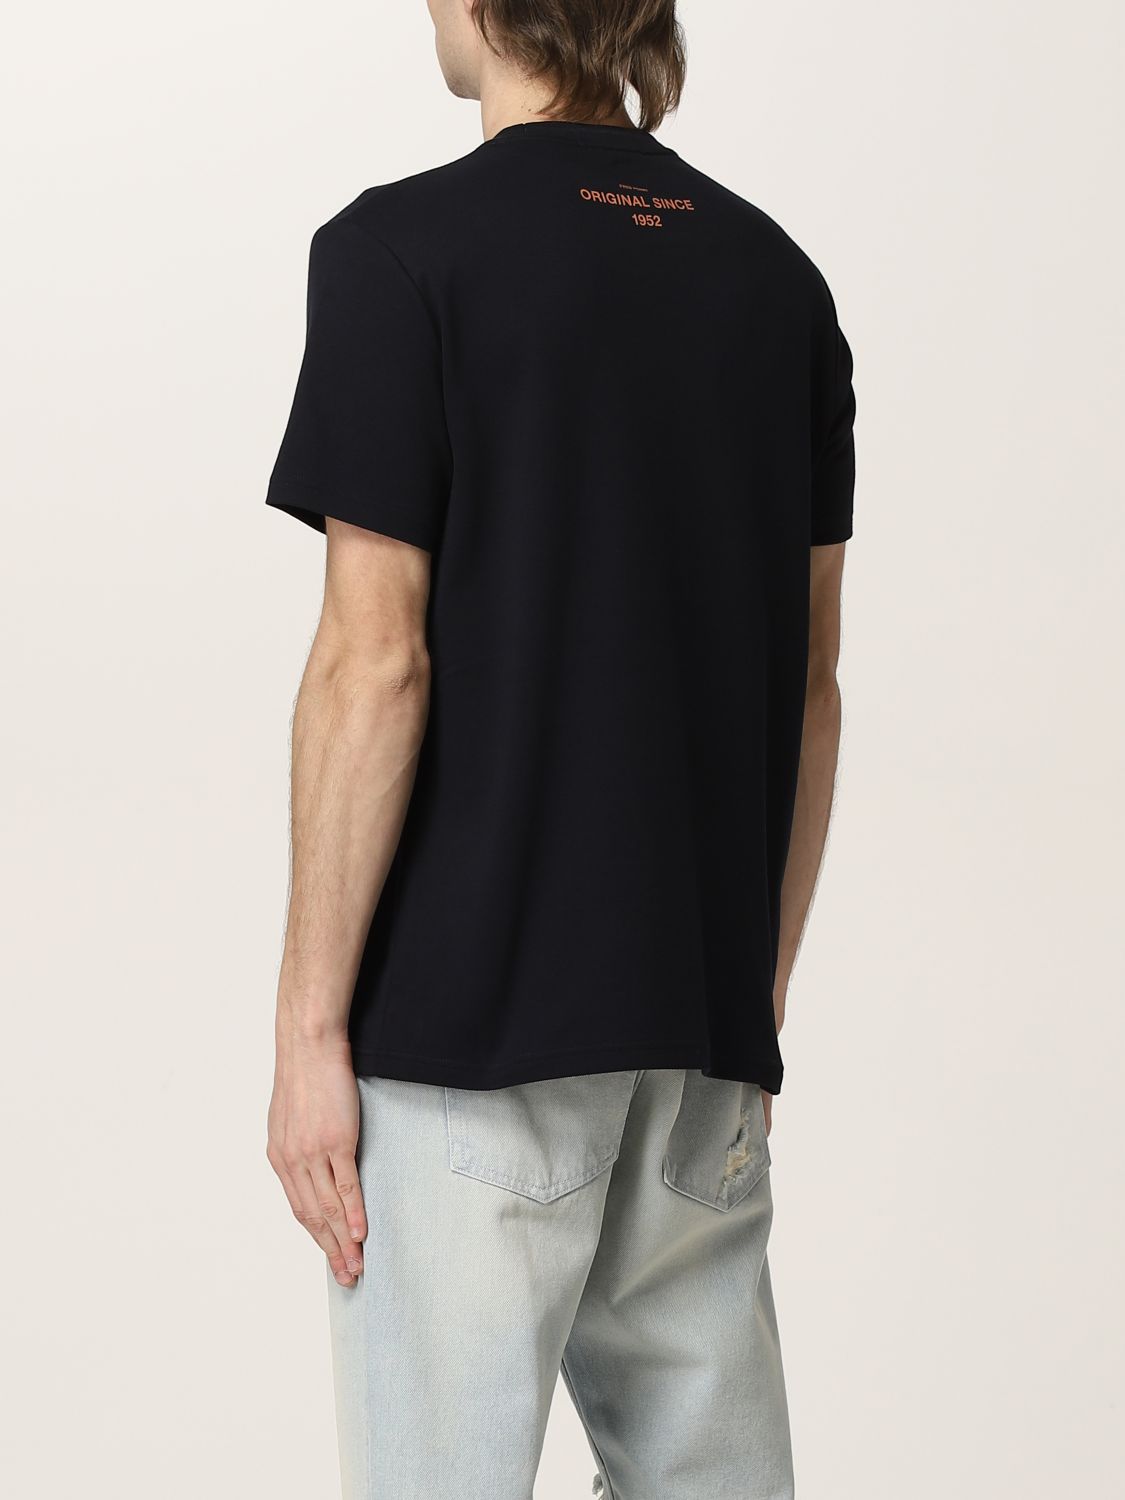 Tシャツ Fred Perry: Tシャツ メンズ Fred Perry ネイビー 2